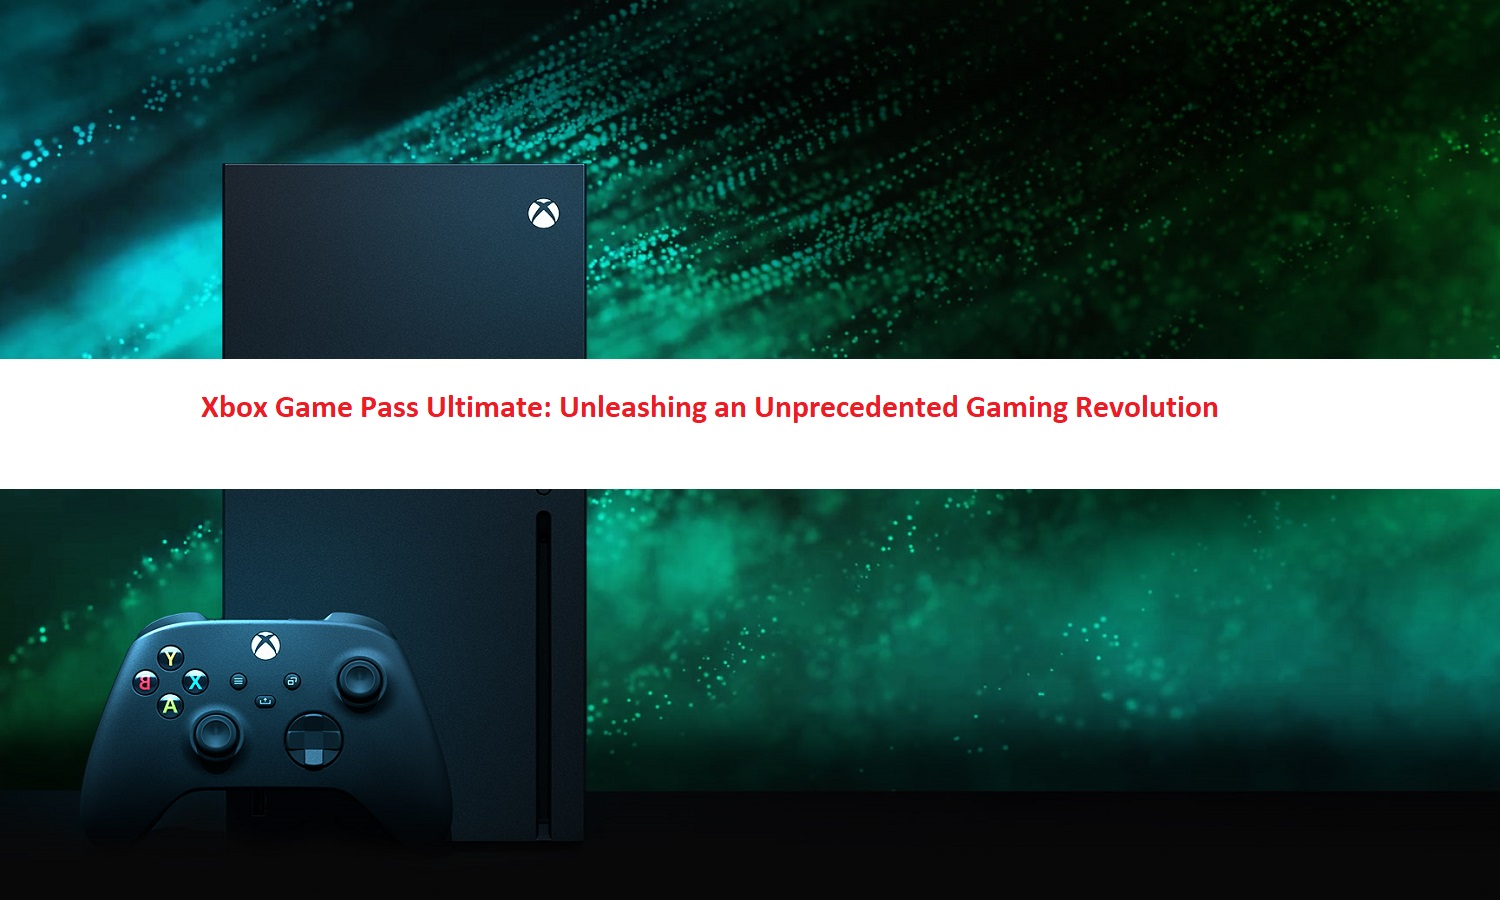 Xbox Game Pass Ultimate: Unleashing an Unprecedented Gaming Revolution